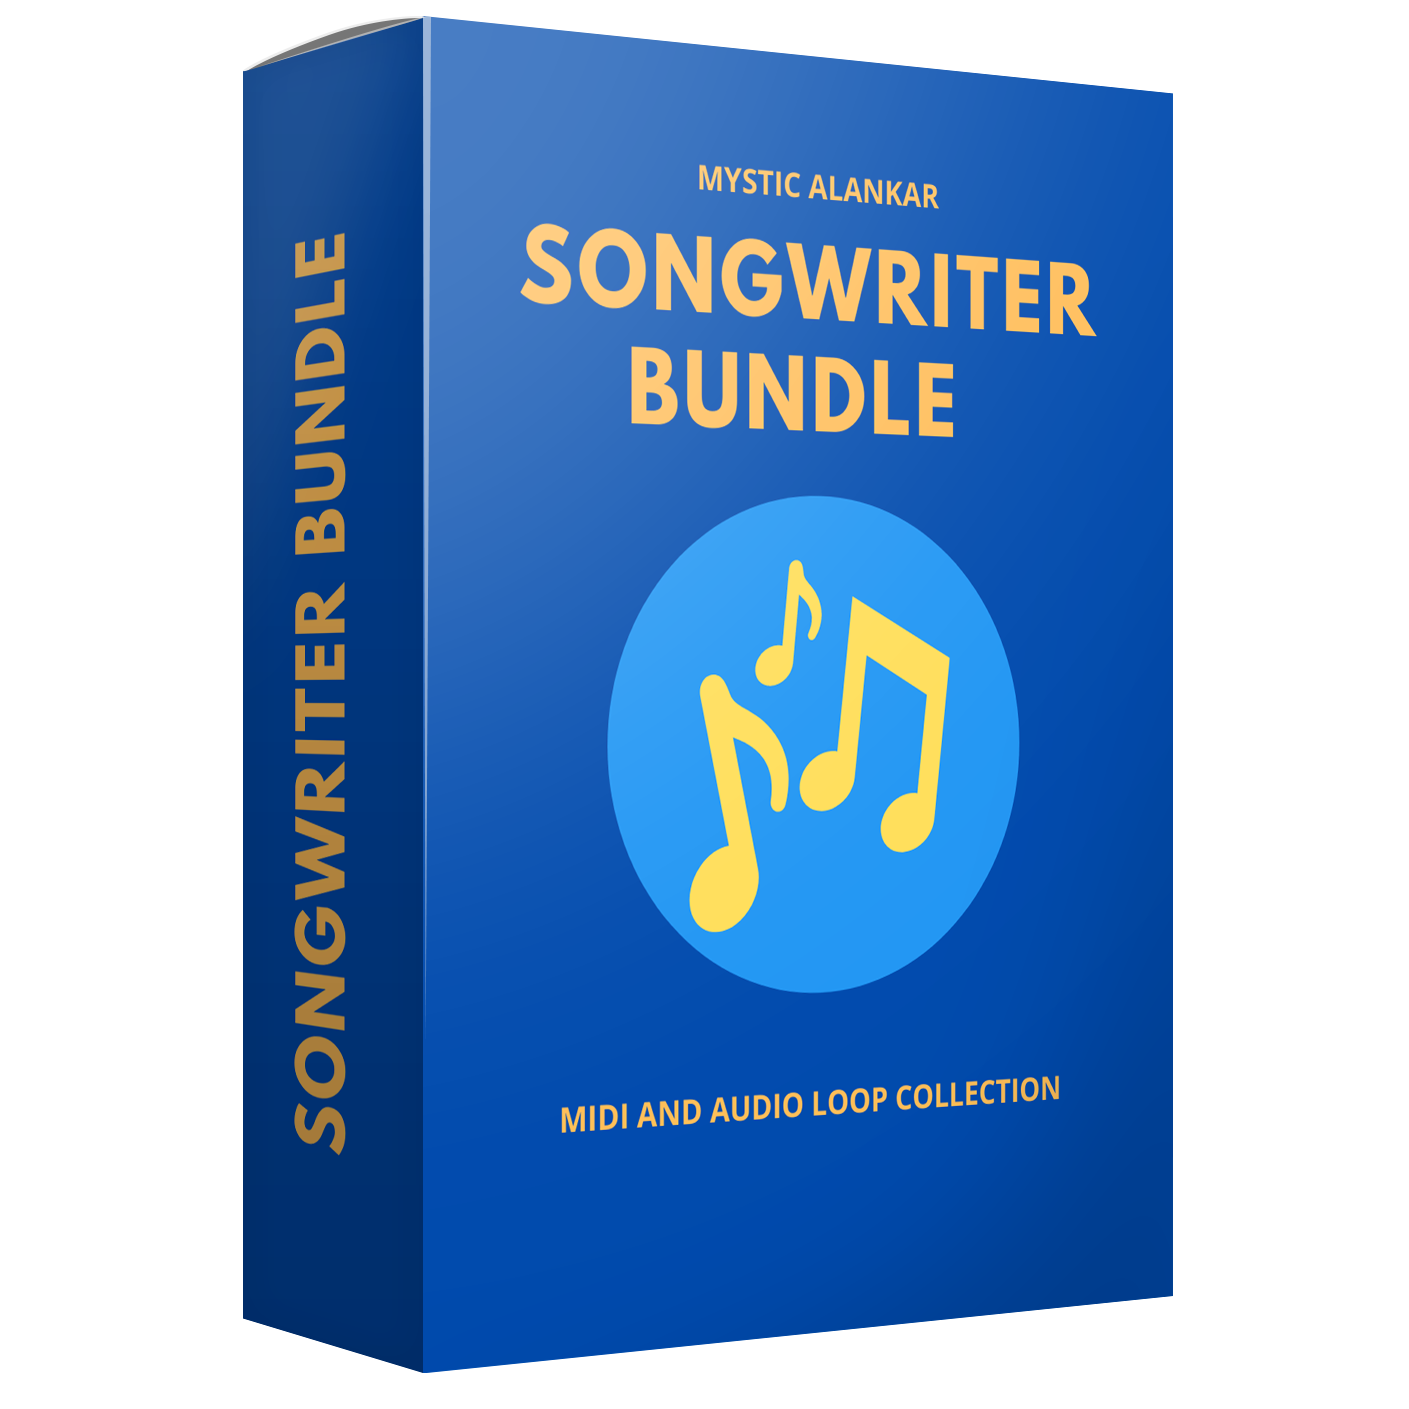 MIDI Piano, Guitar Loops For Songwriters